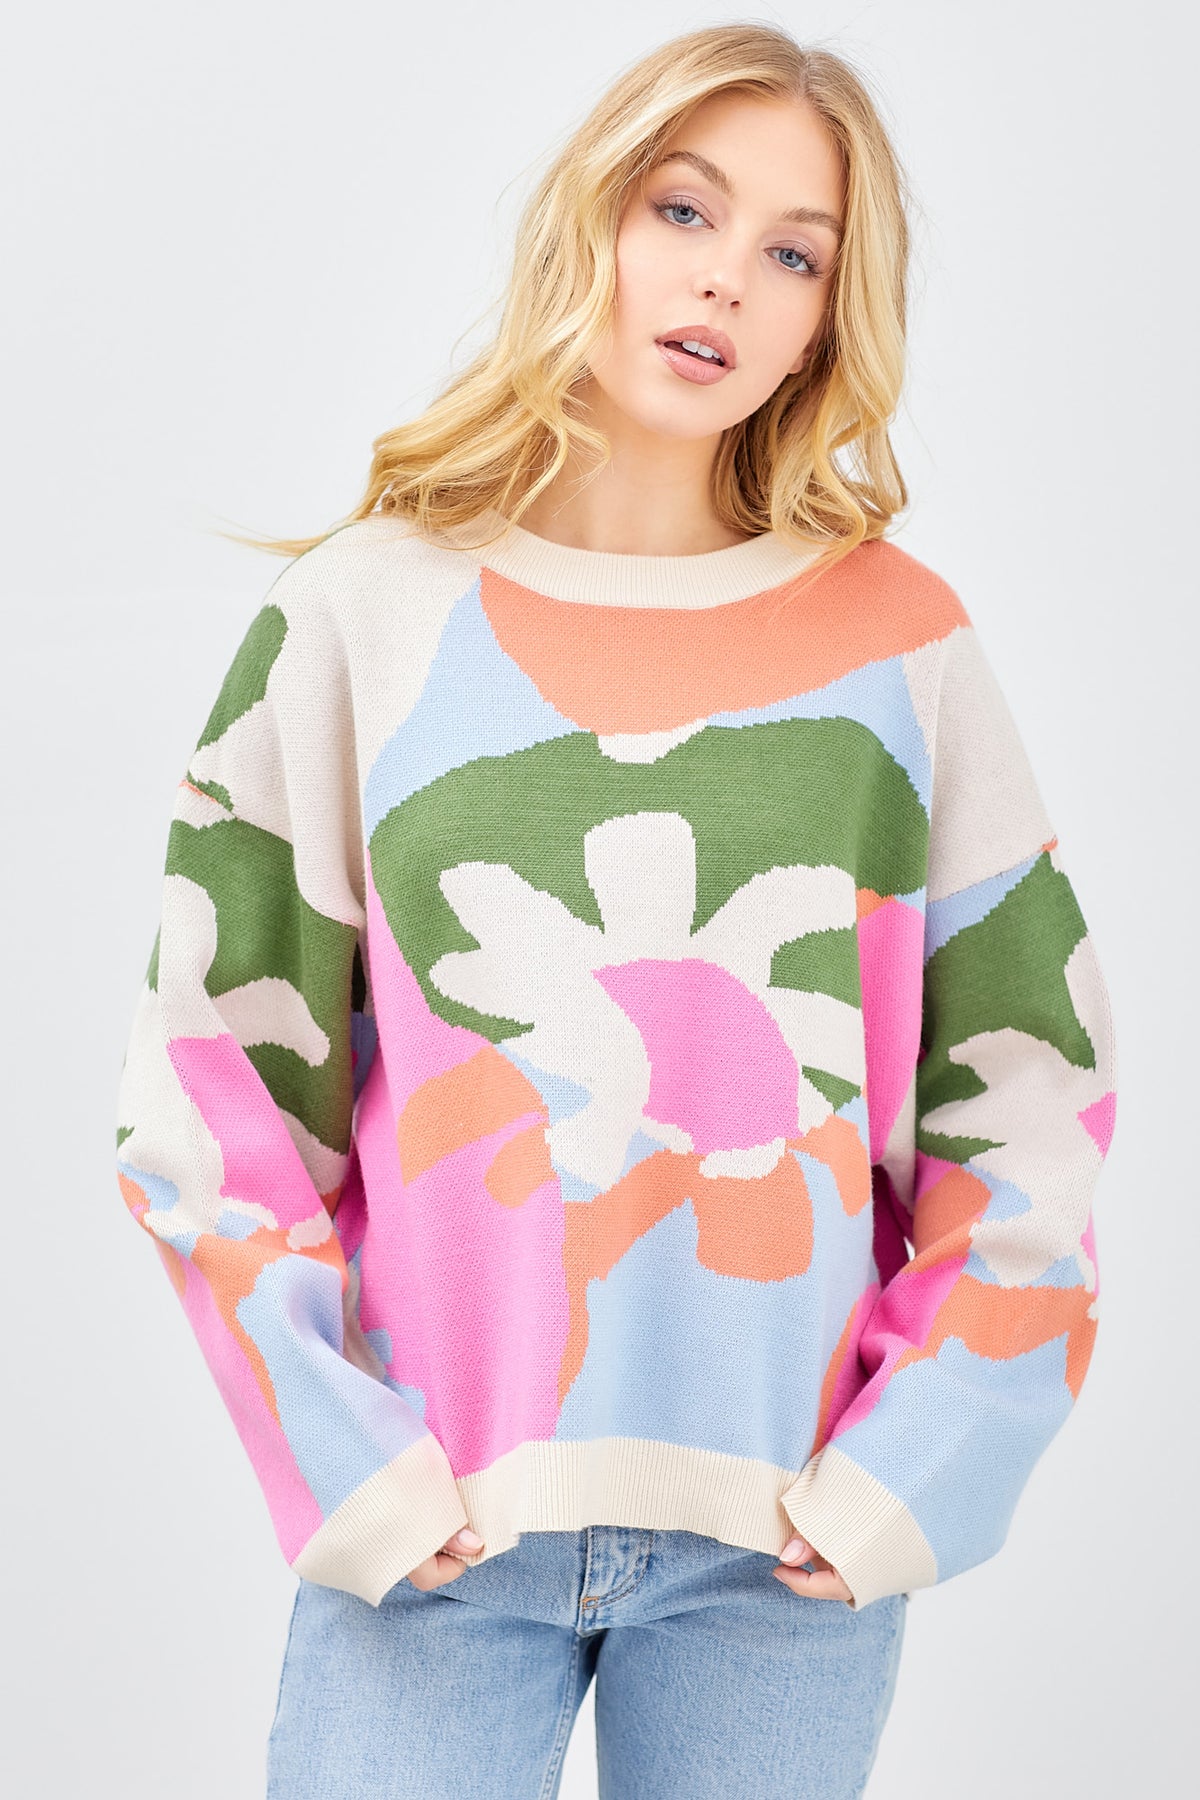 Abstract Form Sweater - Cream